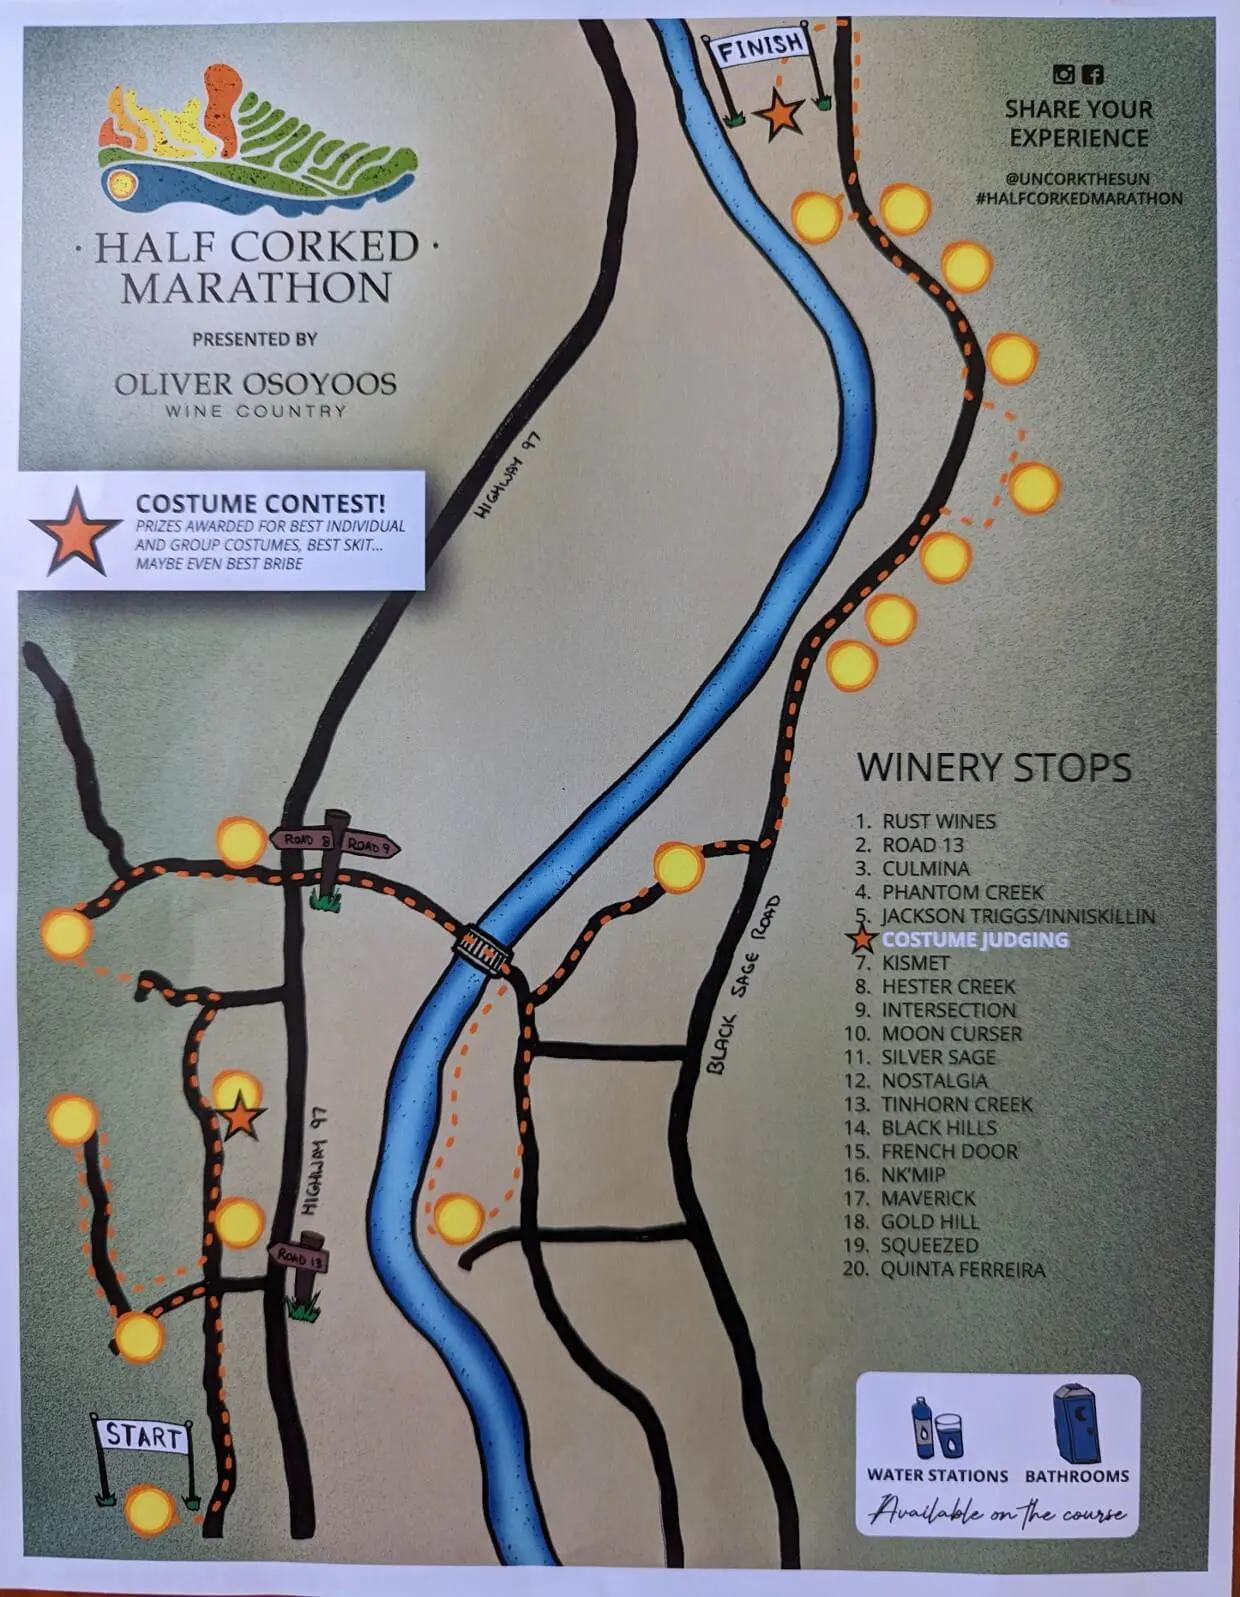 Half Corked Marathon running route map with wineries marked